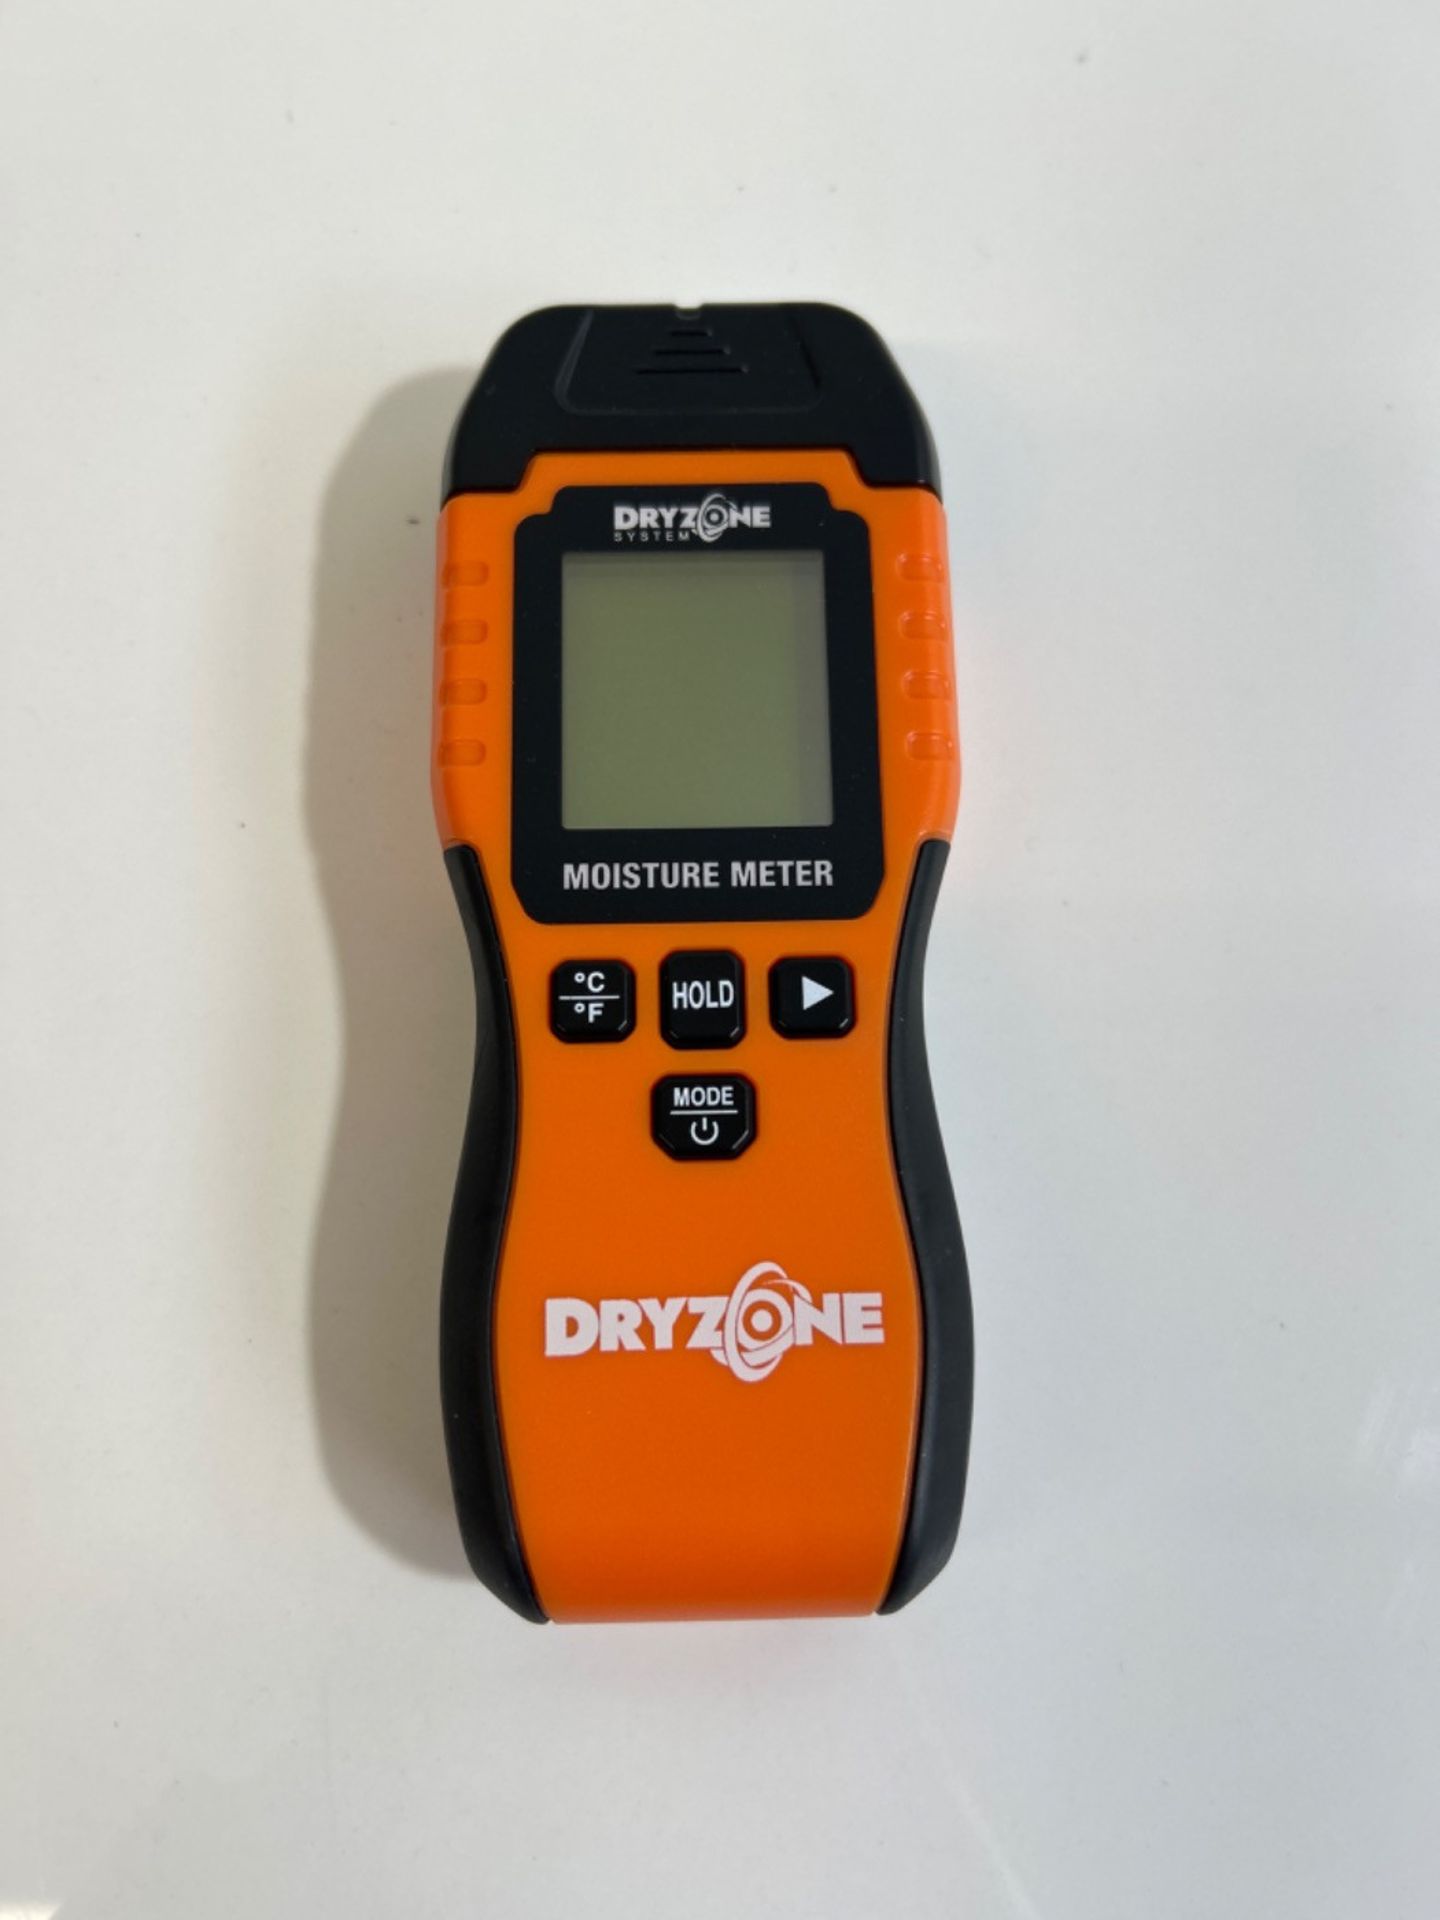 Dryzone Moisture Meter Detector Damp Meter For Wood, Masonry and Other Building Materials - Image 2 of 3